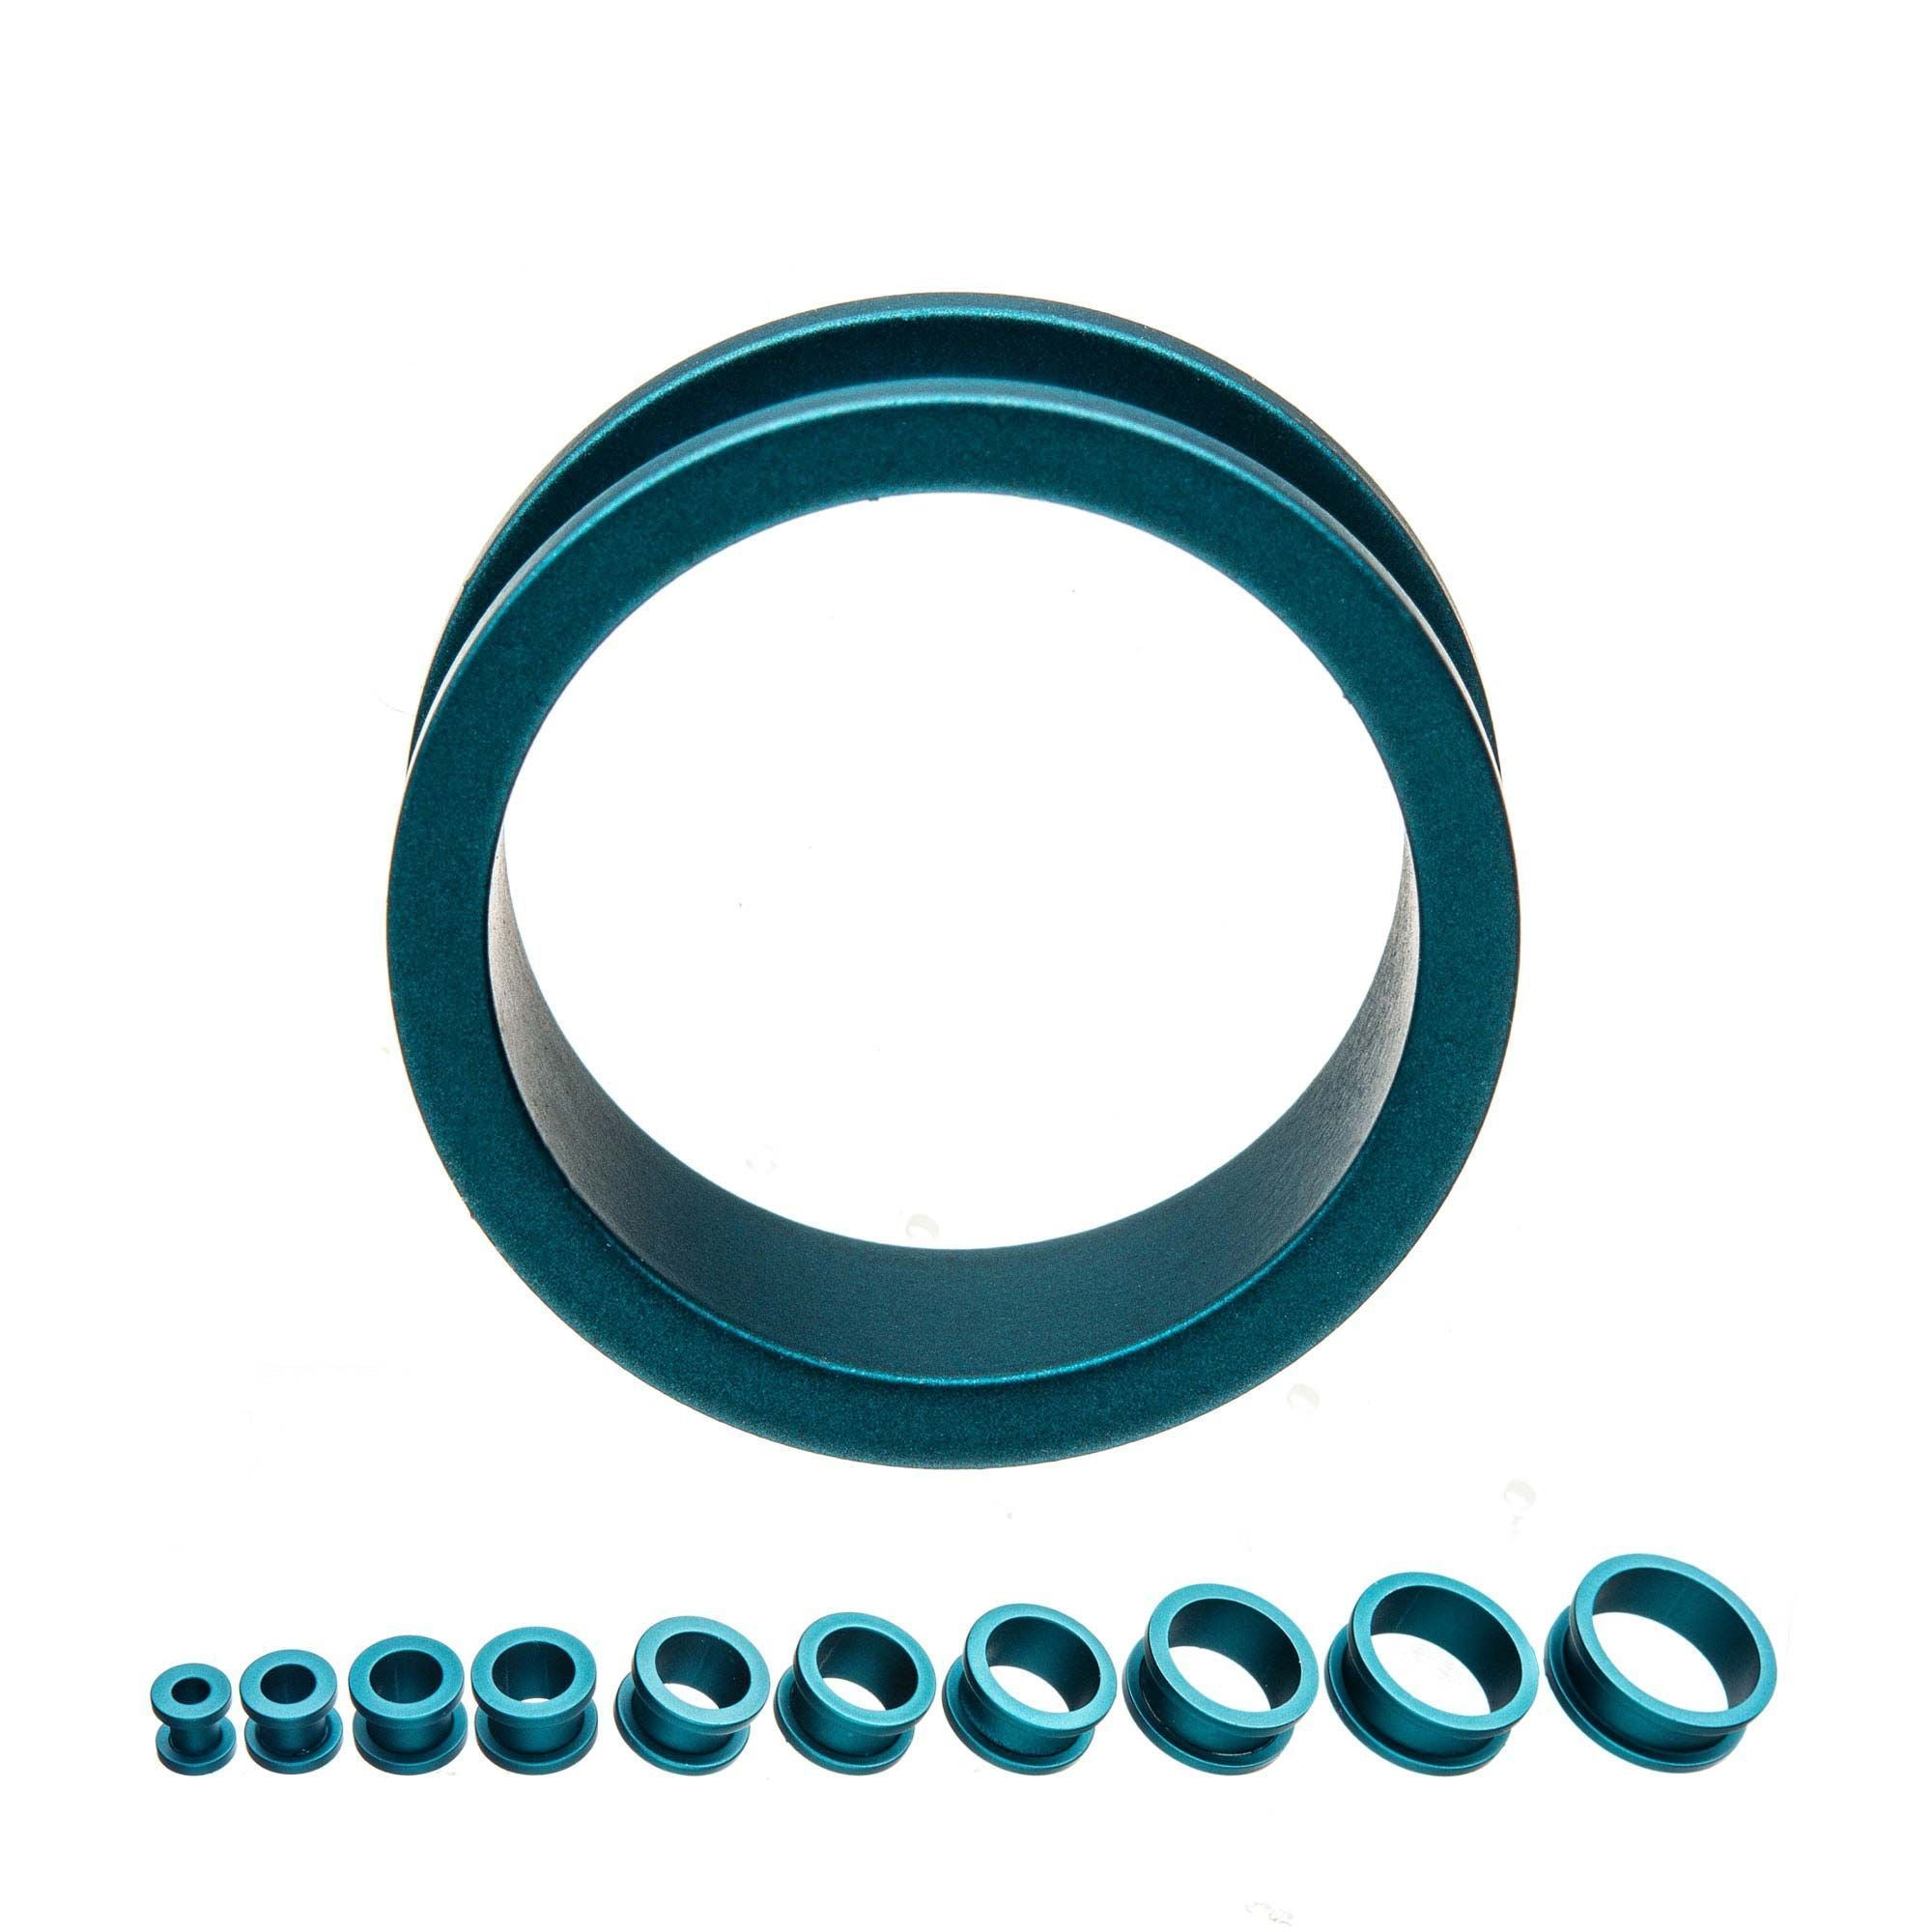 Peacock Blue Silicone Coated Screw Fit Tunnel Plugs - 1 Pair  sbvpsrpdb